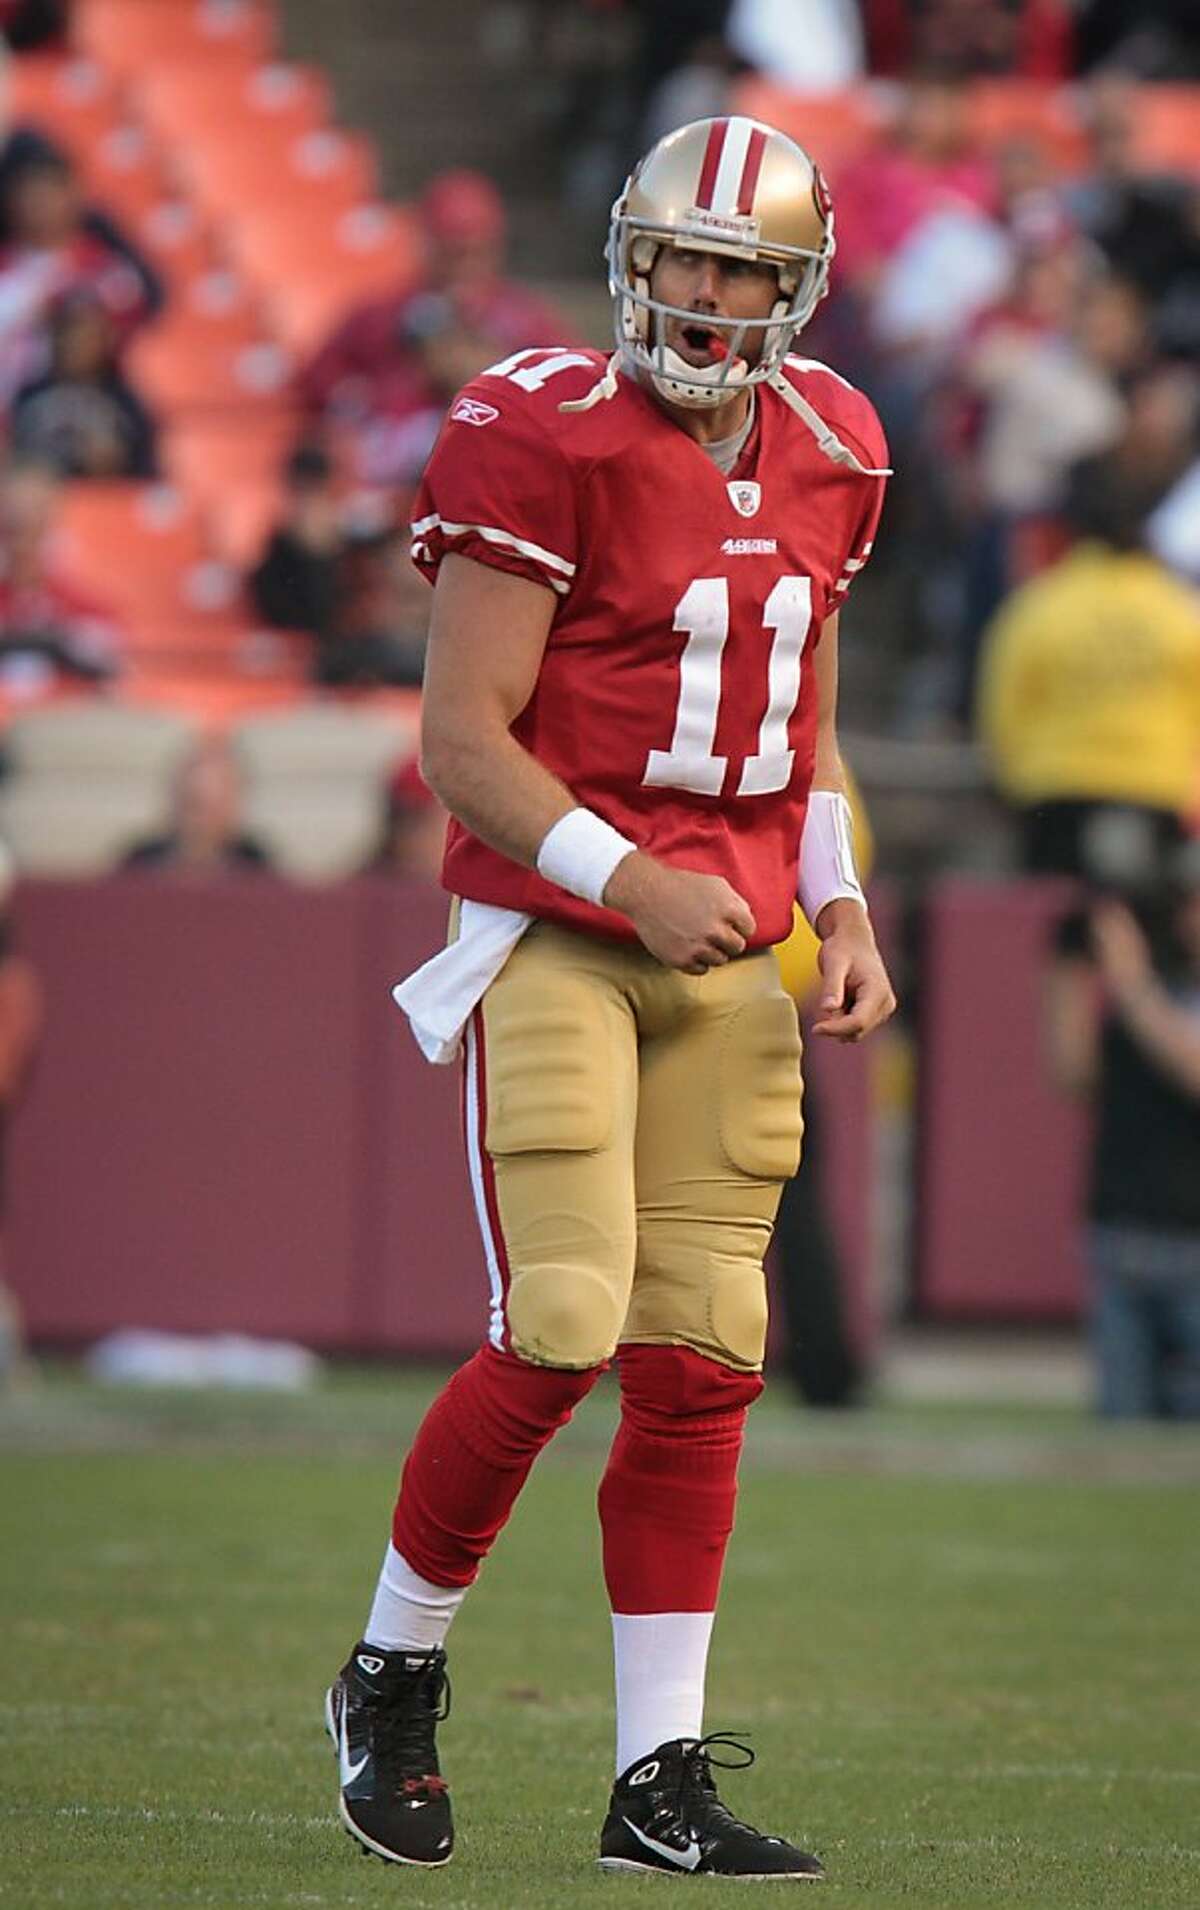 A frustrated 49er quarterback Alex Smith walks off the field after throwing an interception during the 49er-Texans game at Candlestick Park in San Francisco, Calif., on Friday, August 12th, 2011.